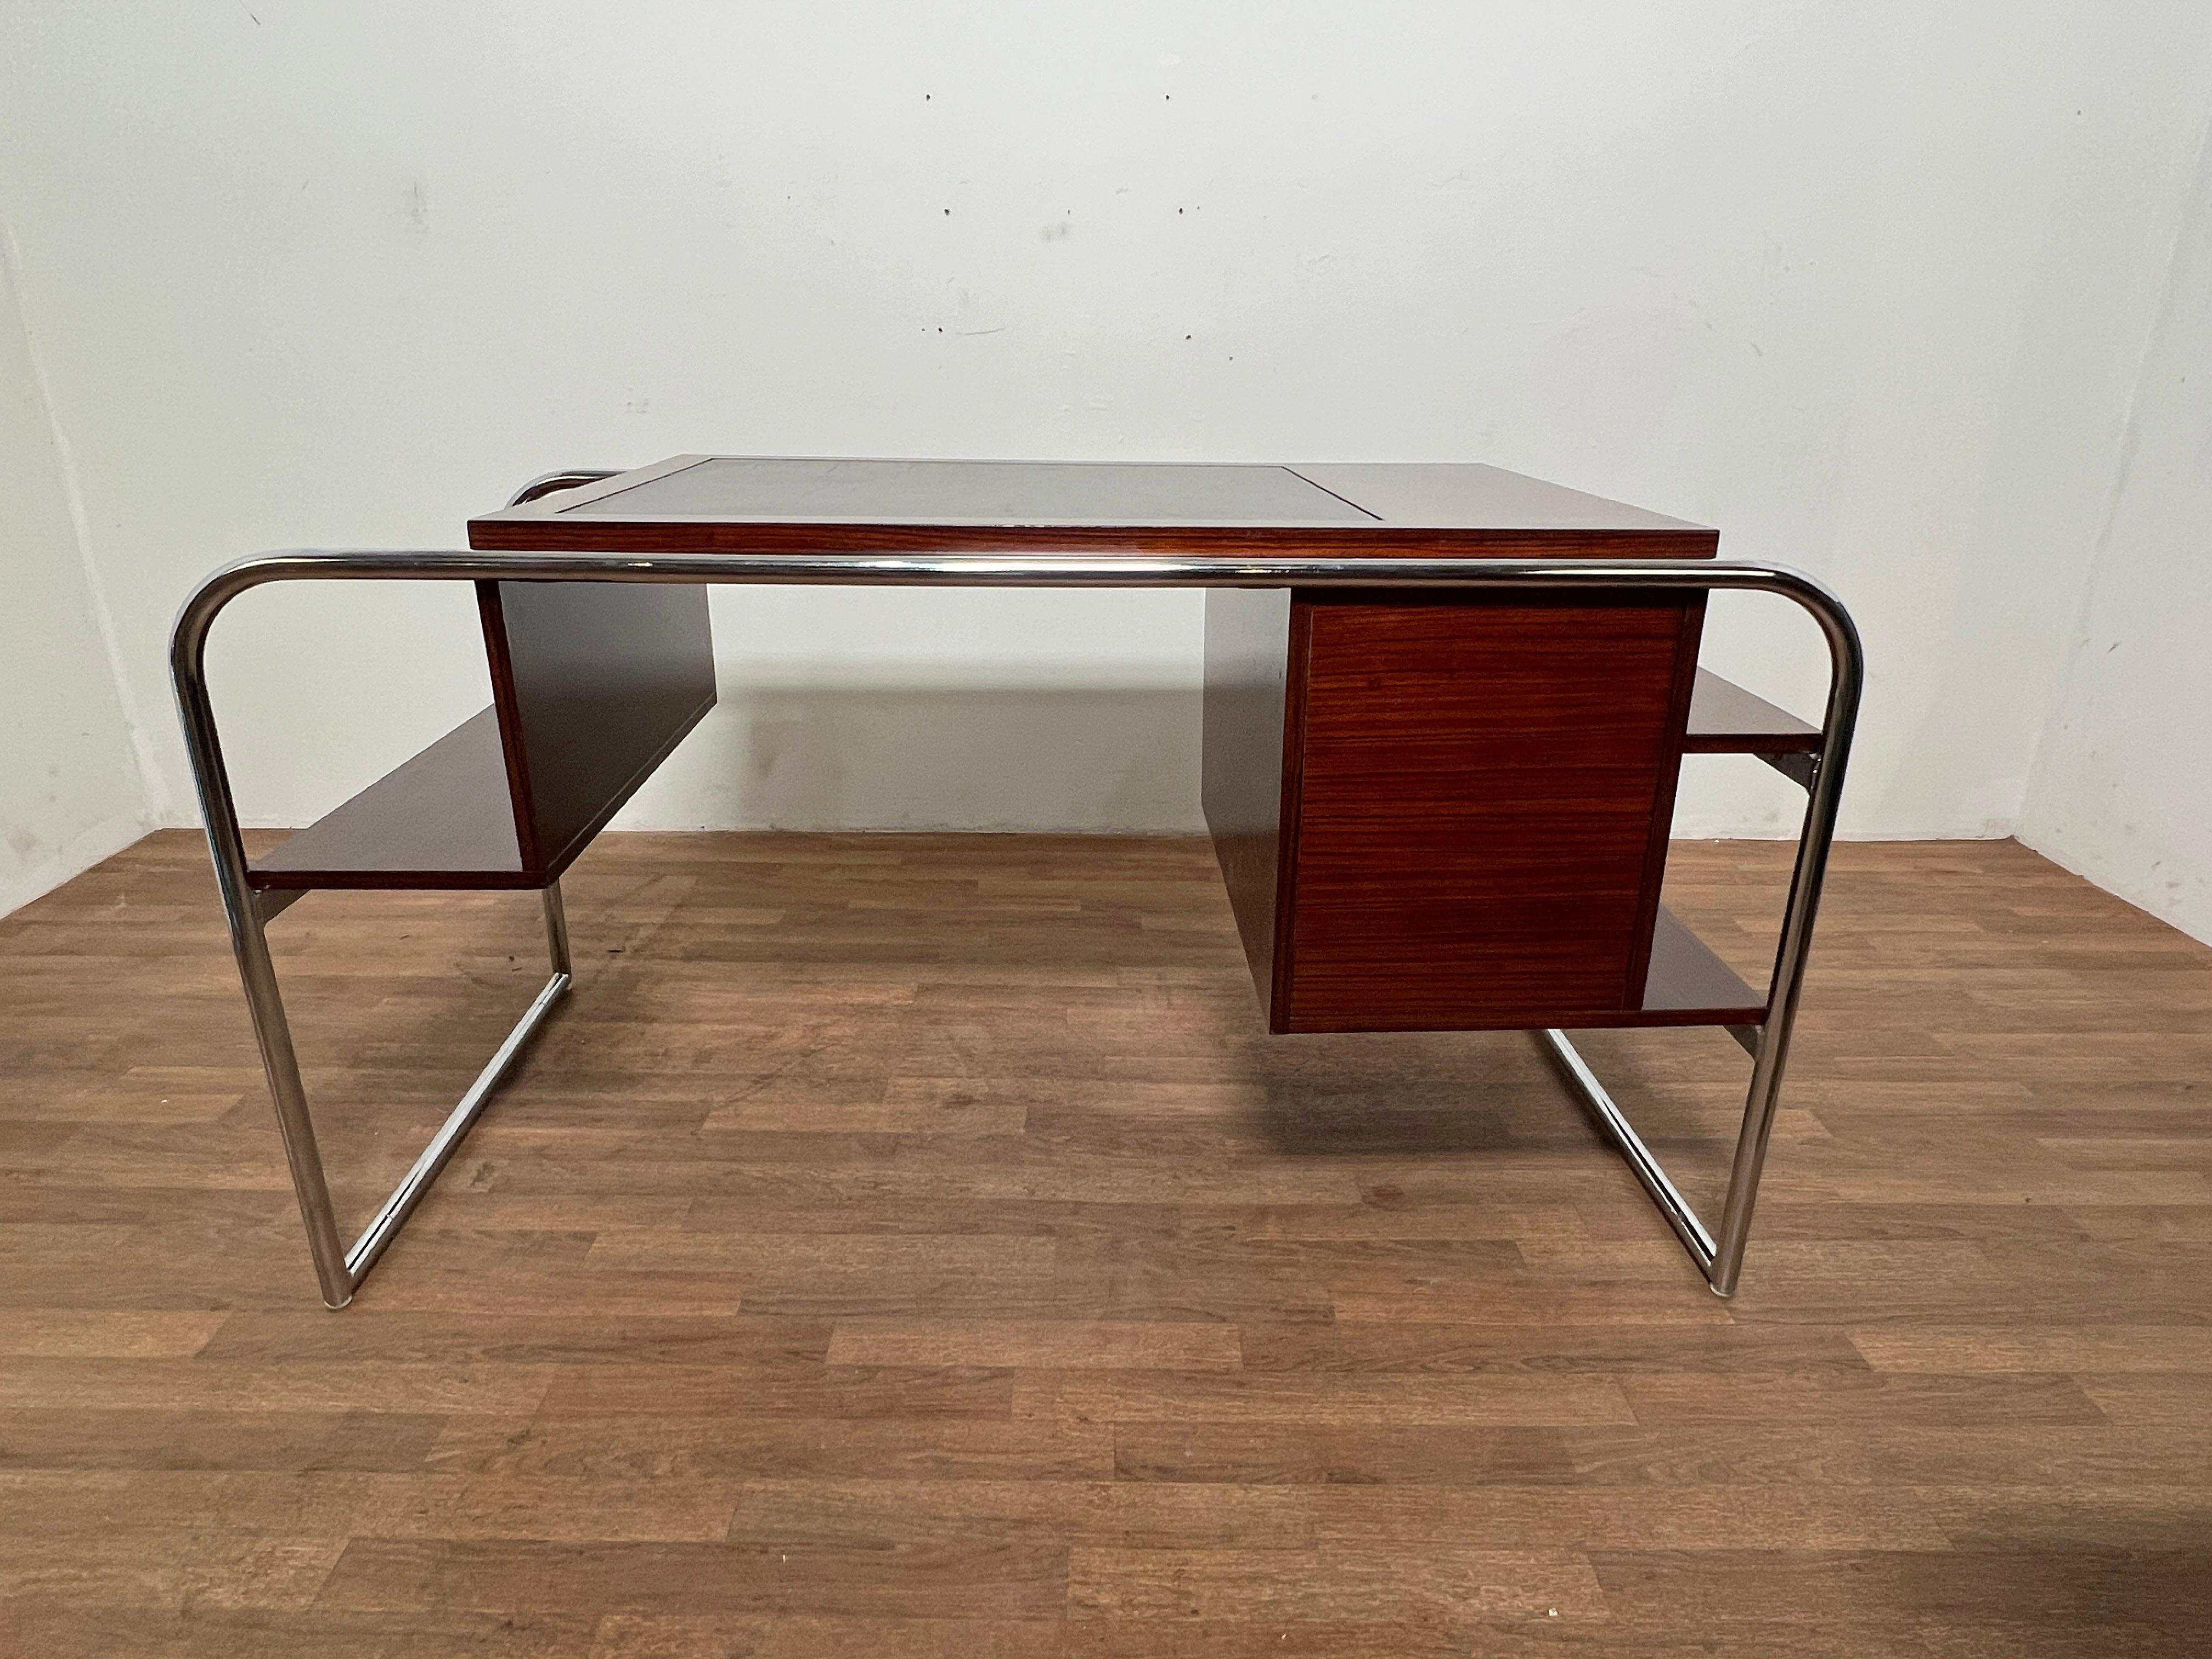 Ralph Lauren Bauhaus Inspired Desk in Wenge, Chrome and Leather 4